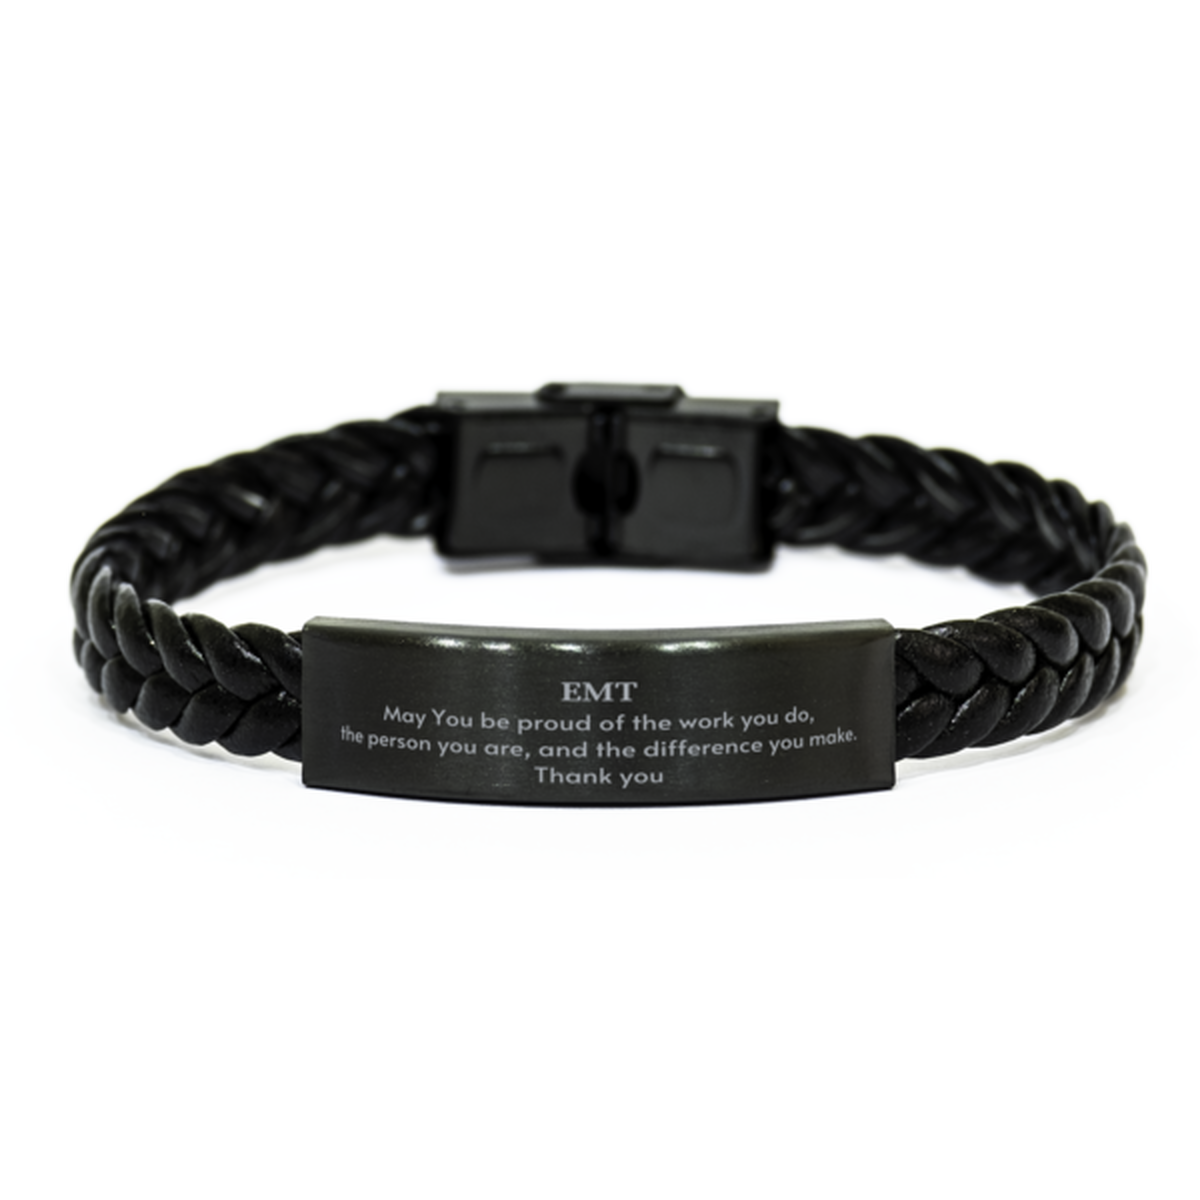 Heartwarming Braided Leather Bracelet Retirement Coworkers Gifts for EMT, EMT May You be proud of the work you do, the person you are Gifts for Boss Men Women Friends